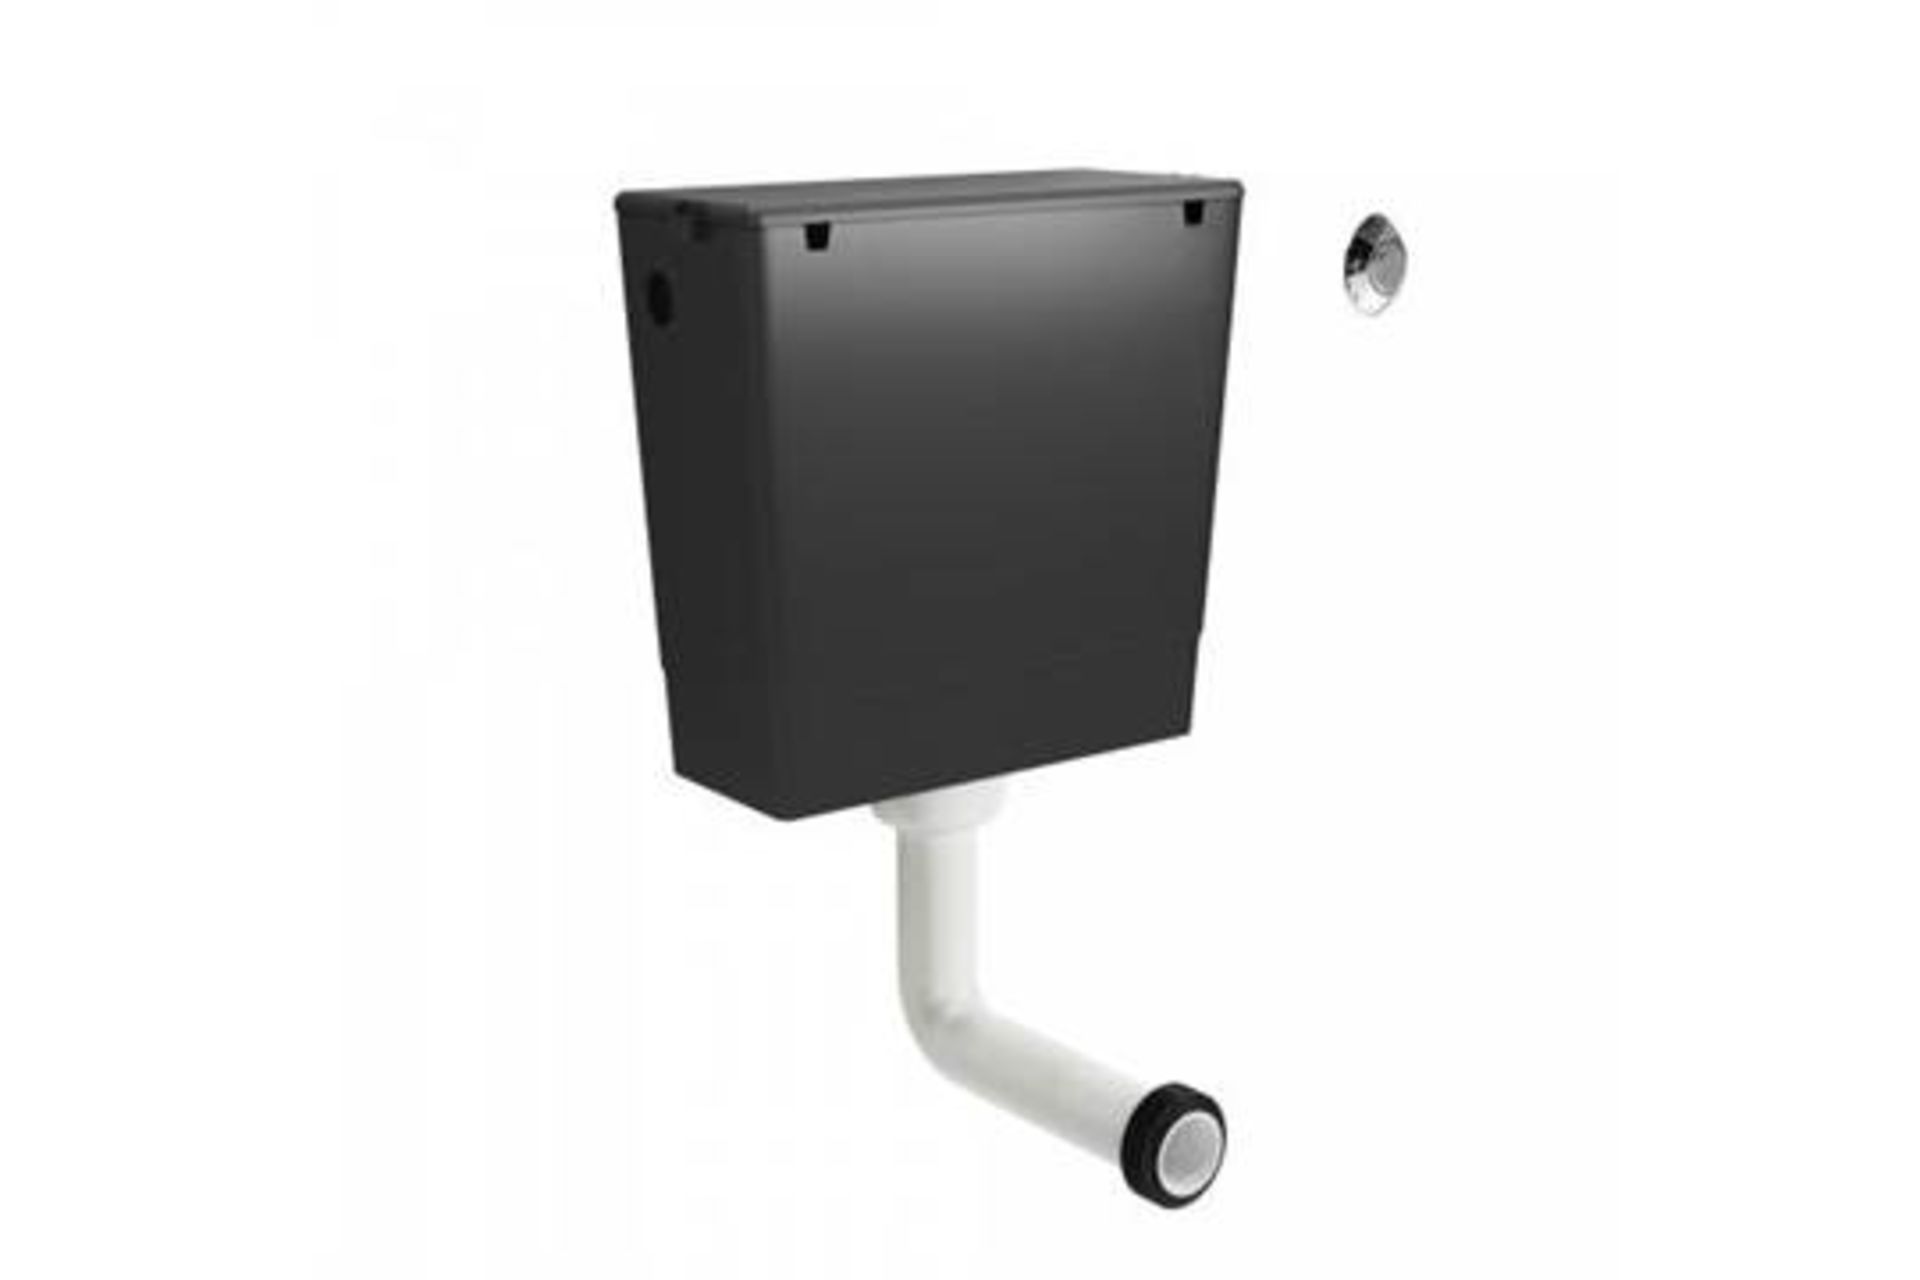 (J66) Wirquin Dual Flush Concealed Cistern. RRP £79.99. This Dual Flush Concealed Cistern is ... - Image 4 of 4